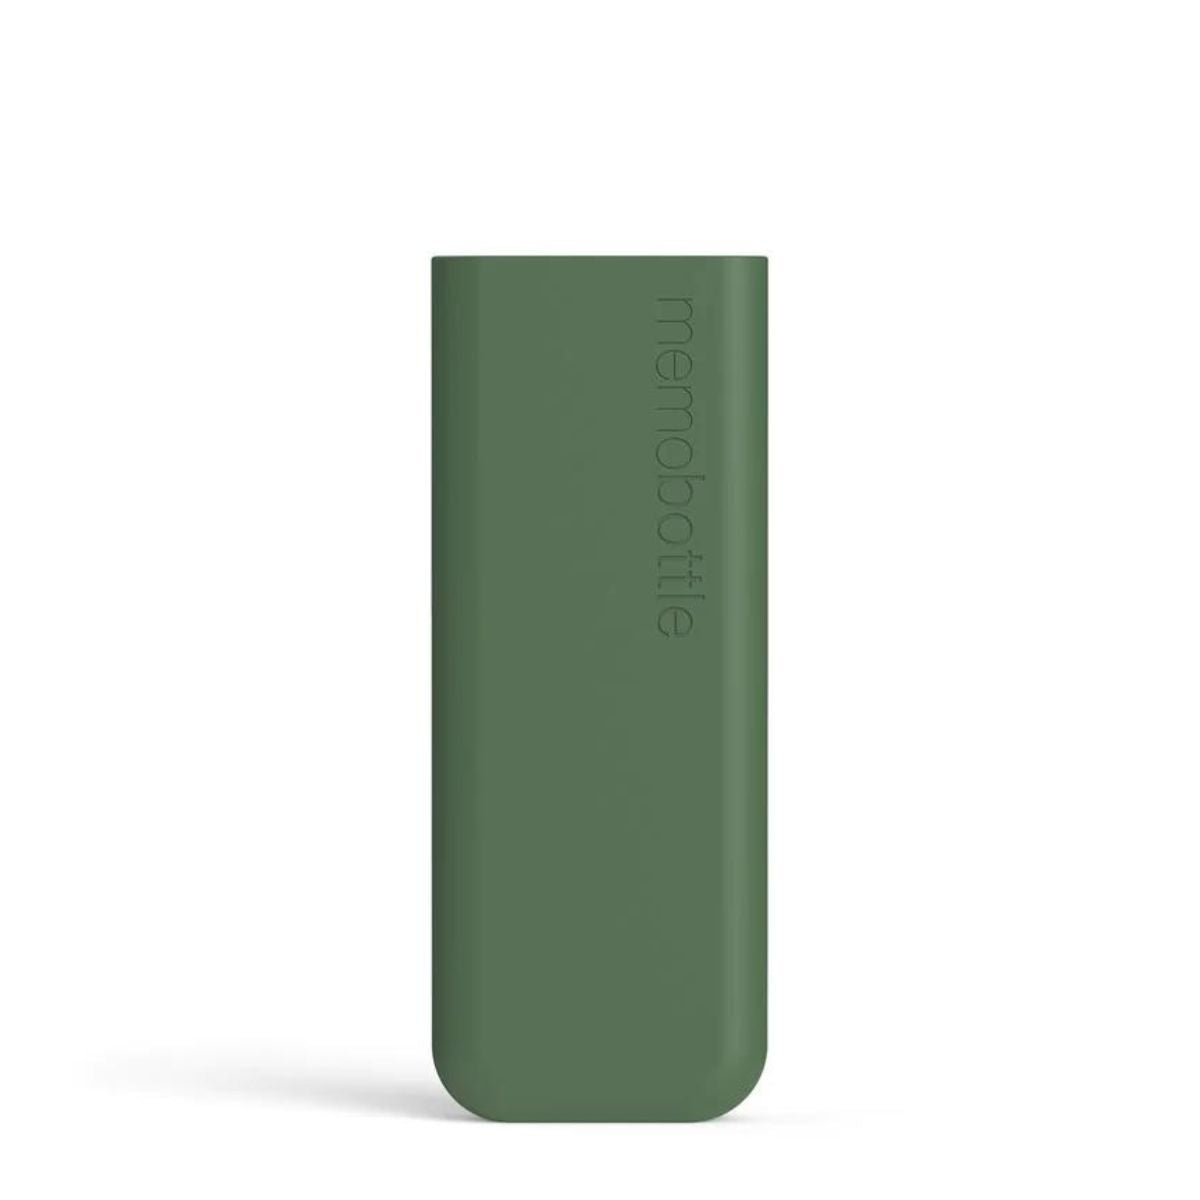 SLIM Silicone Sleeve, Moss Green | memobottle - Wake Concept Store  